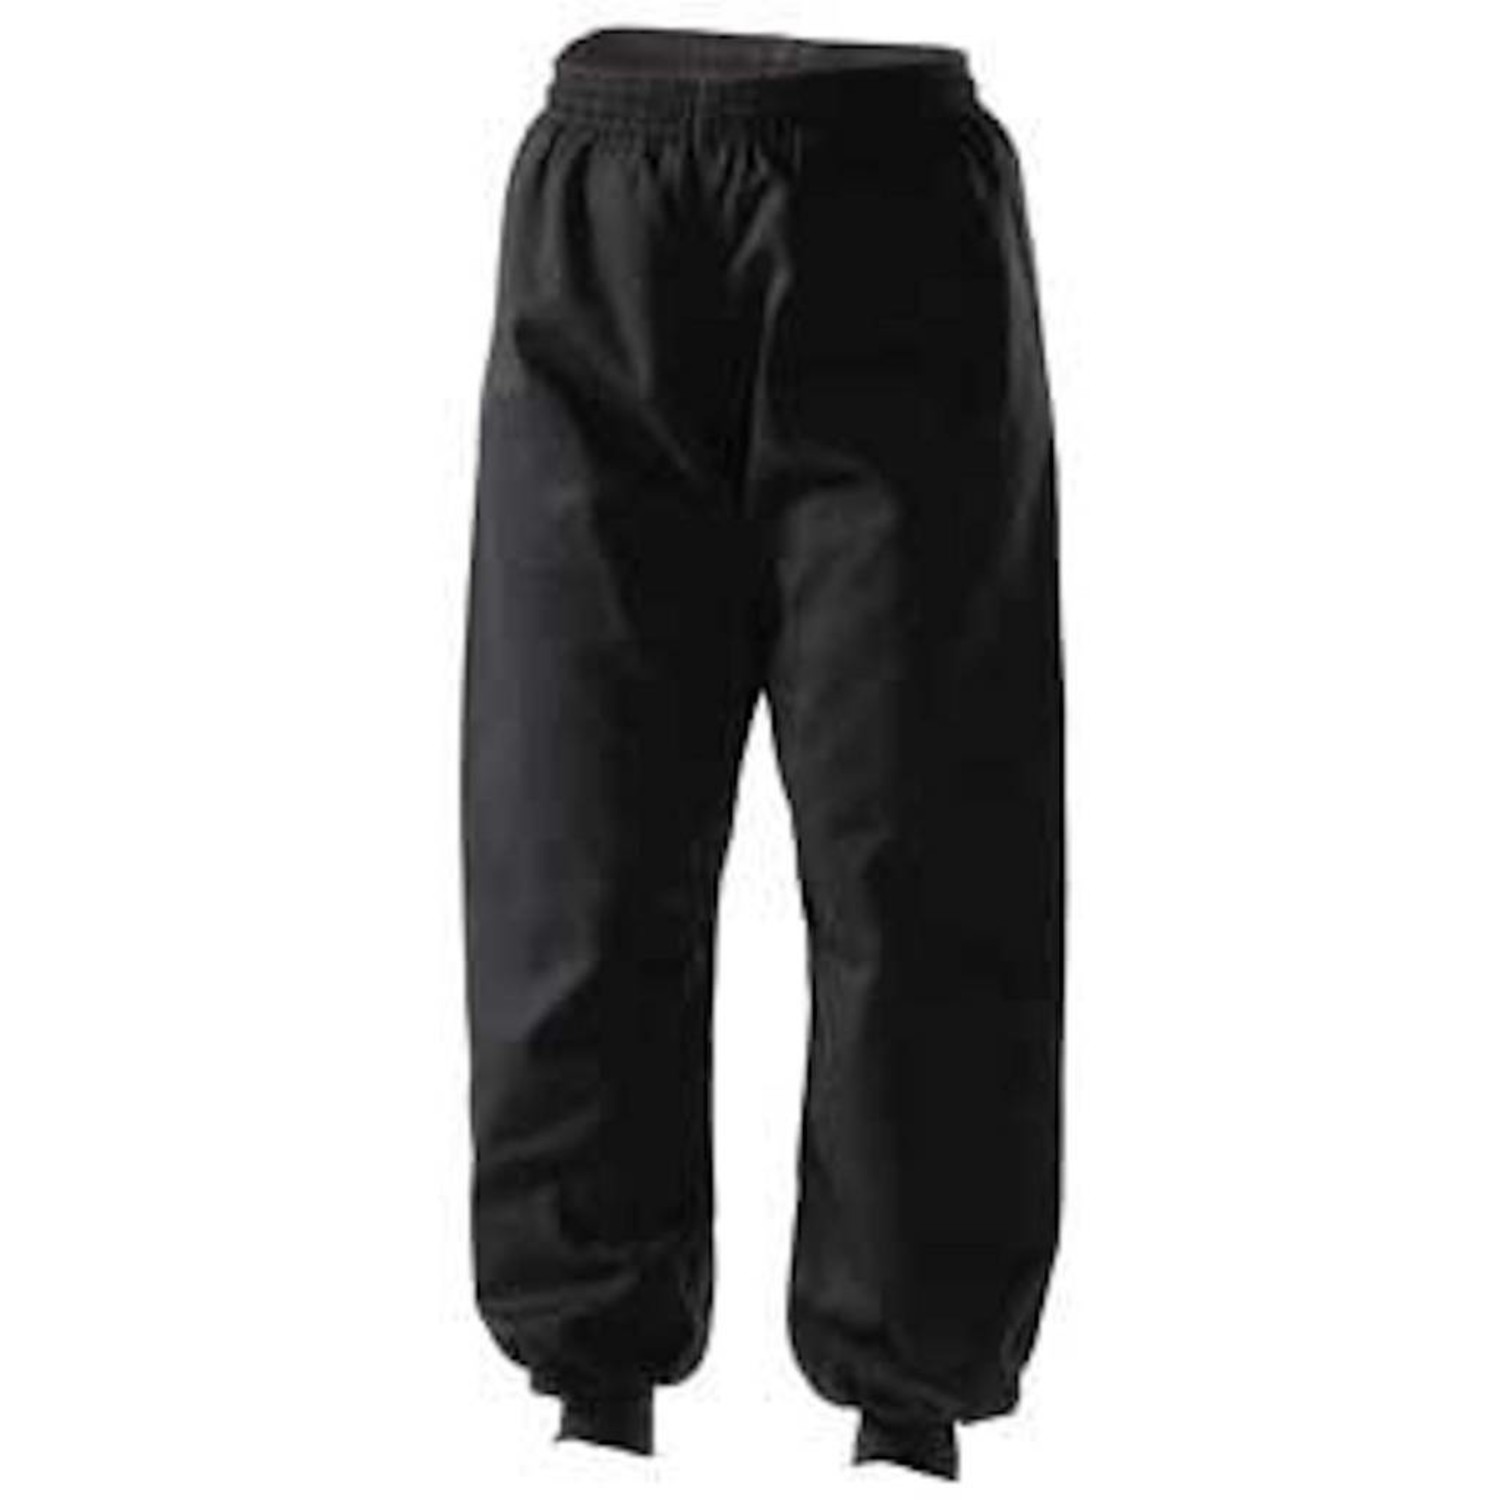 Traditional Martial Art Tai Chi Yoga Training Pants Trousers Size XSX   AAGsport